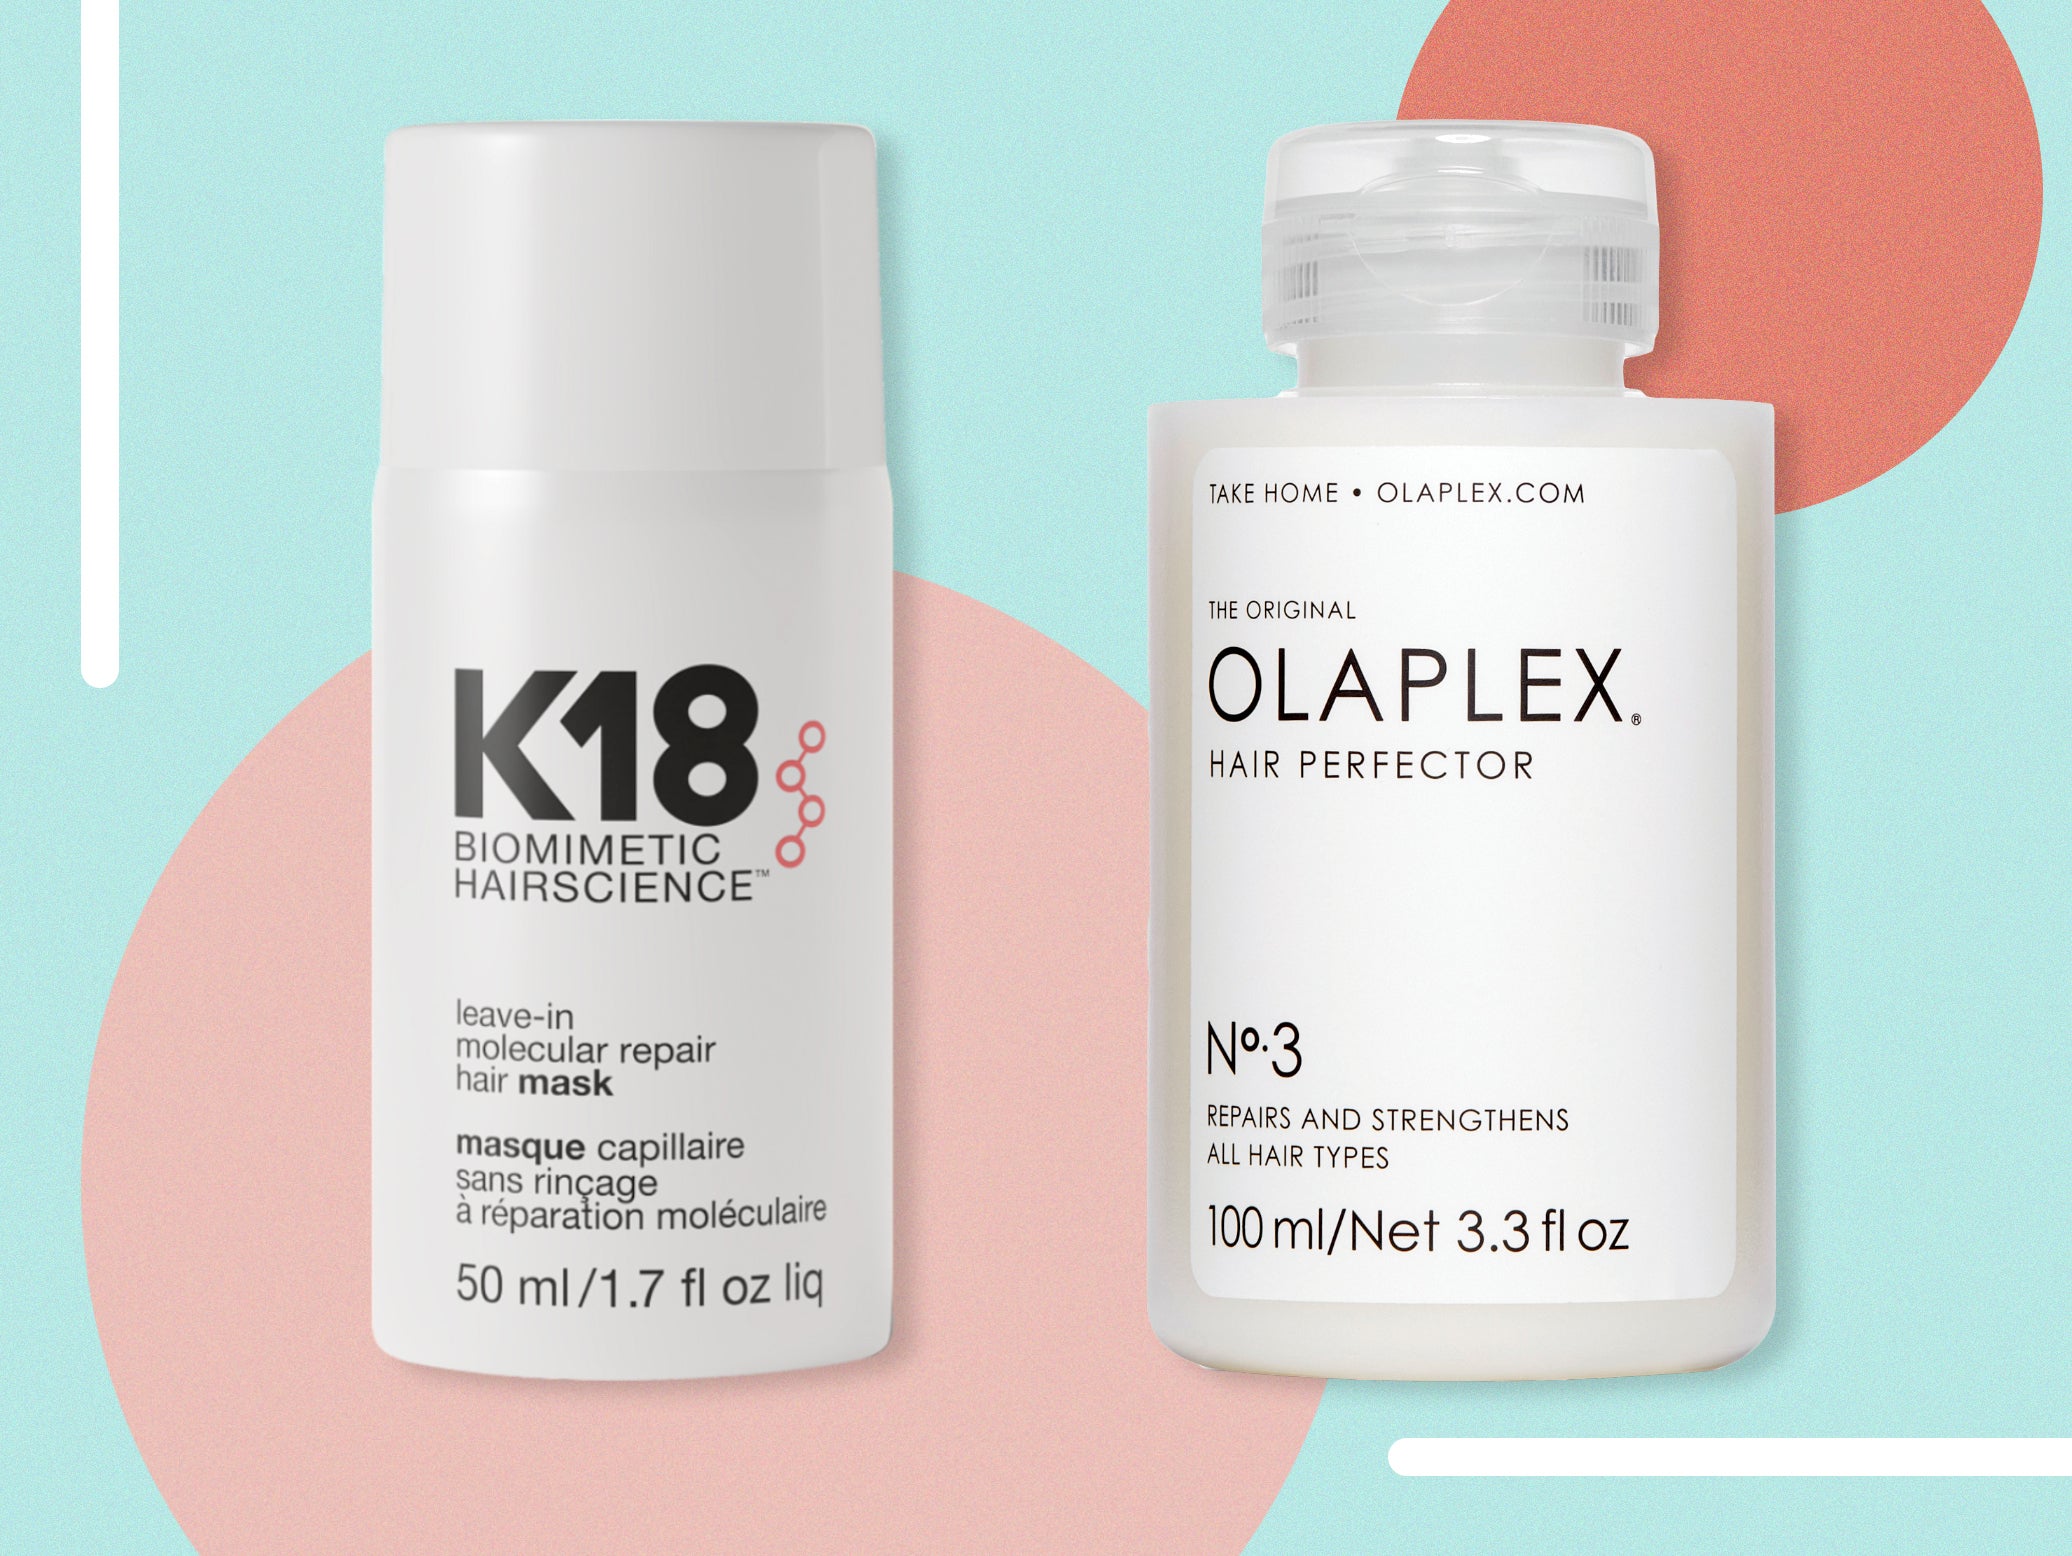 K18 vs Olaplex: Which leave-in hair mask is better? | The Independent